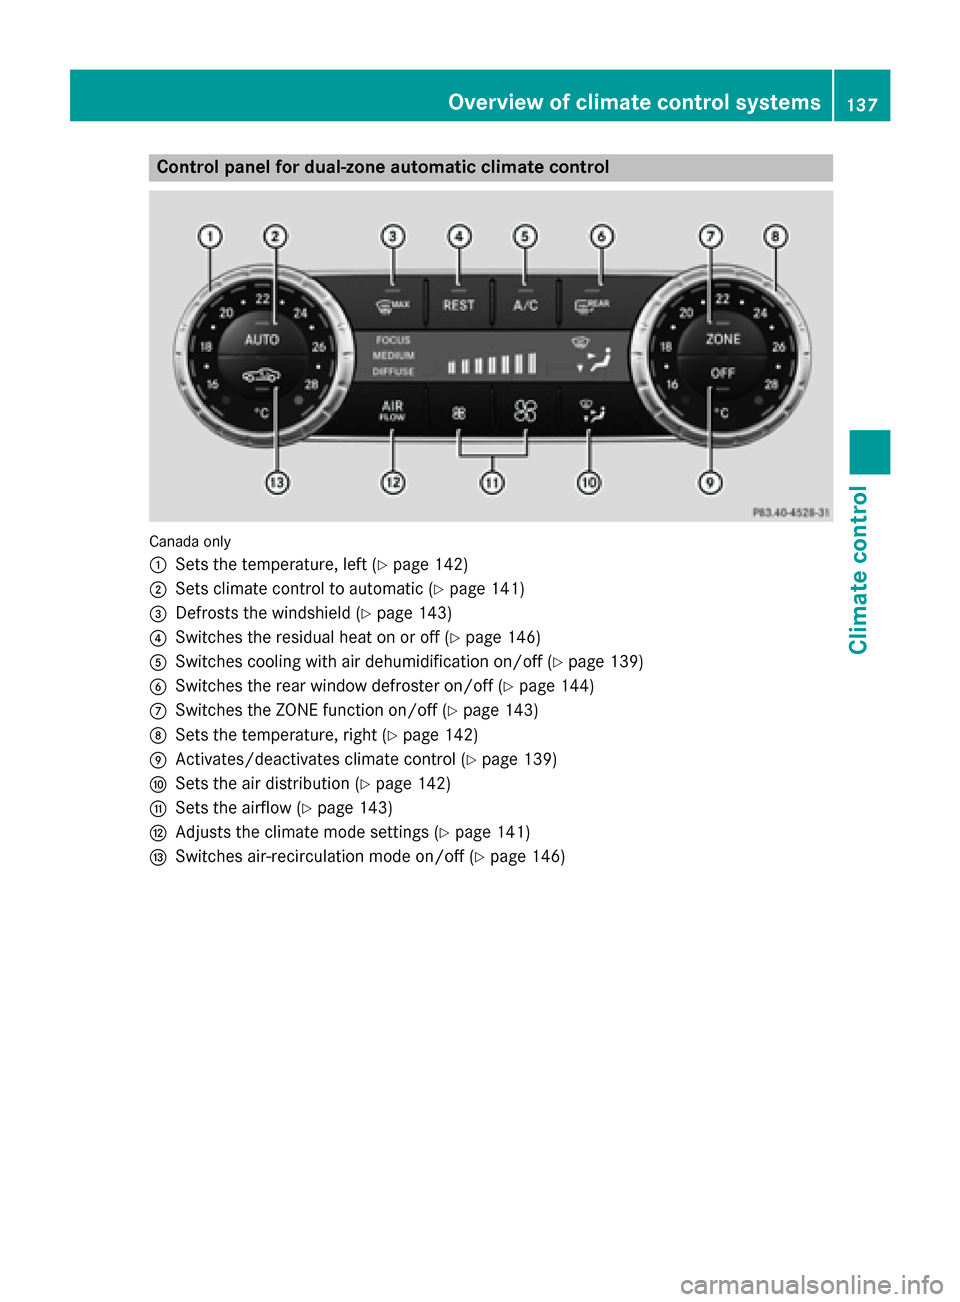 MERCEDES-BENZ SL-Class 2016 R231 User Guide Control panel for dual-zone automatic climate control
Canadaonly
:
Sets the temperature, left (Ypage 142)
;Sets climate control to automatic (Ypage 141)
=Defrosts the windshield (Ypage 143)
?Switches 